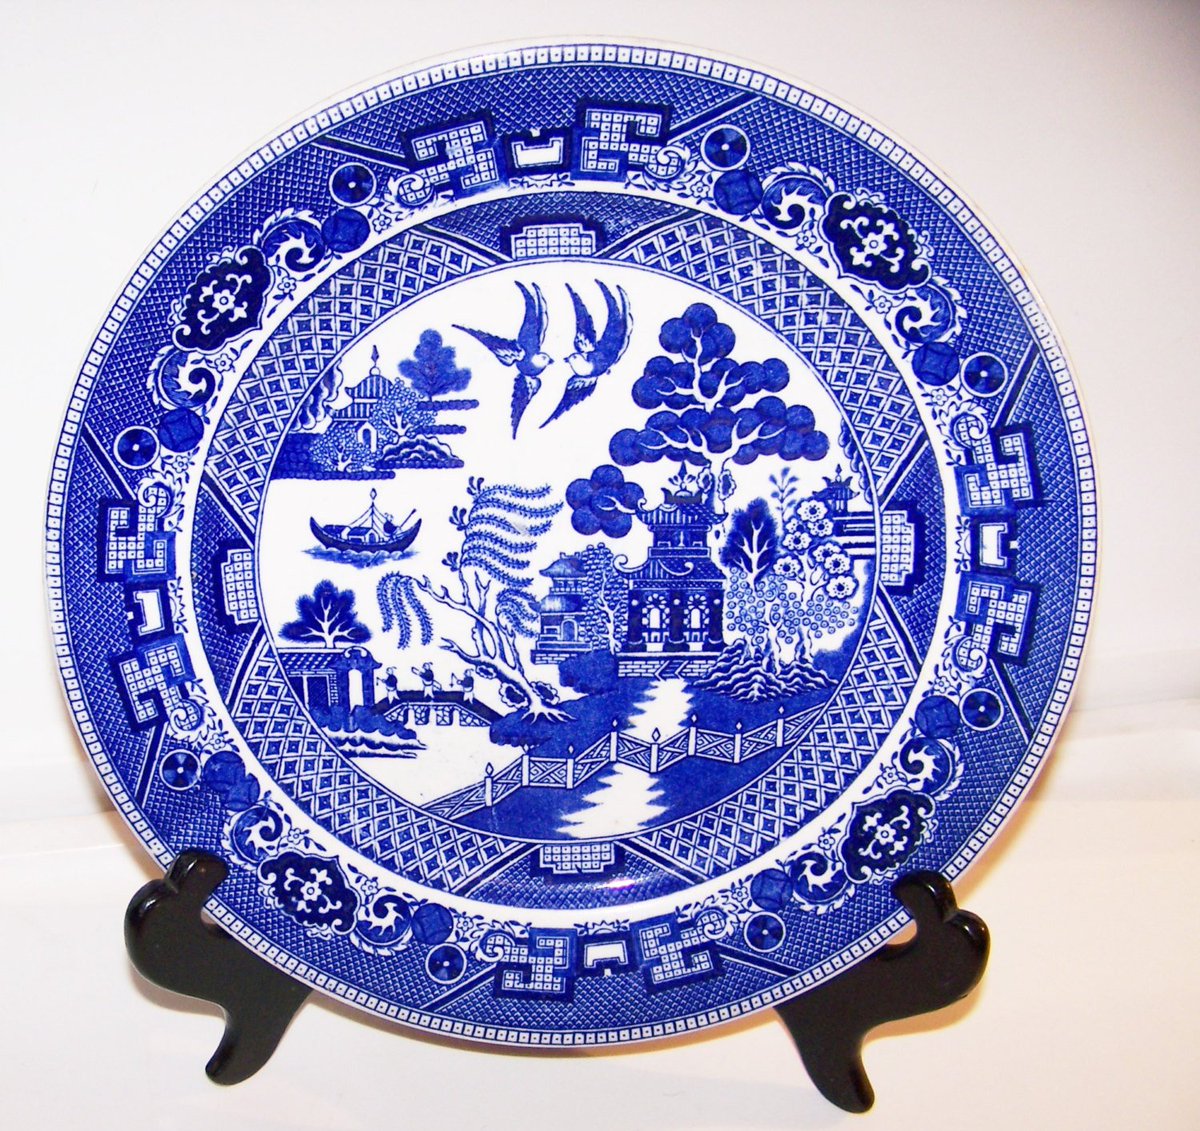 Vintage Blue Willow Dinner Plate, 9' Plate, Willow Ware USA, Blue and White Plate, Table Decor, Home Decor, No Chips or Cracks tuppu.net/5682d7b7  #VintageDinnerPlate